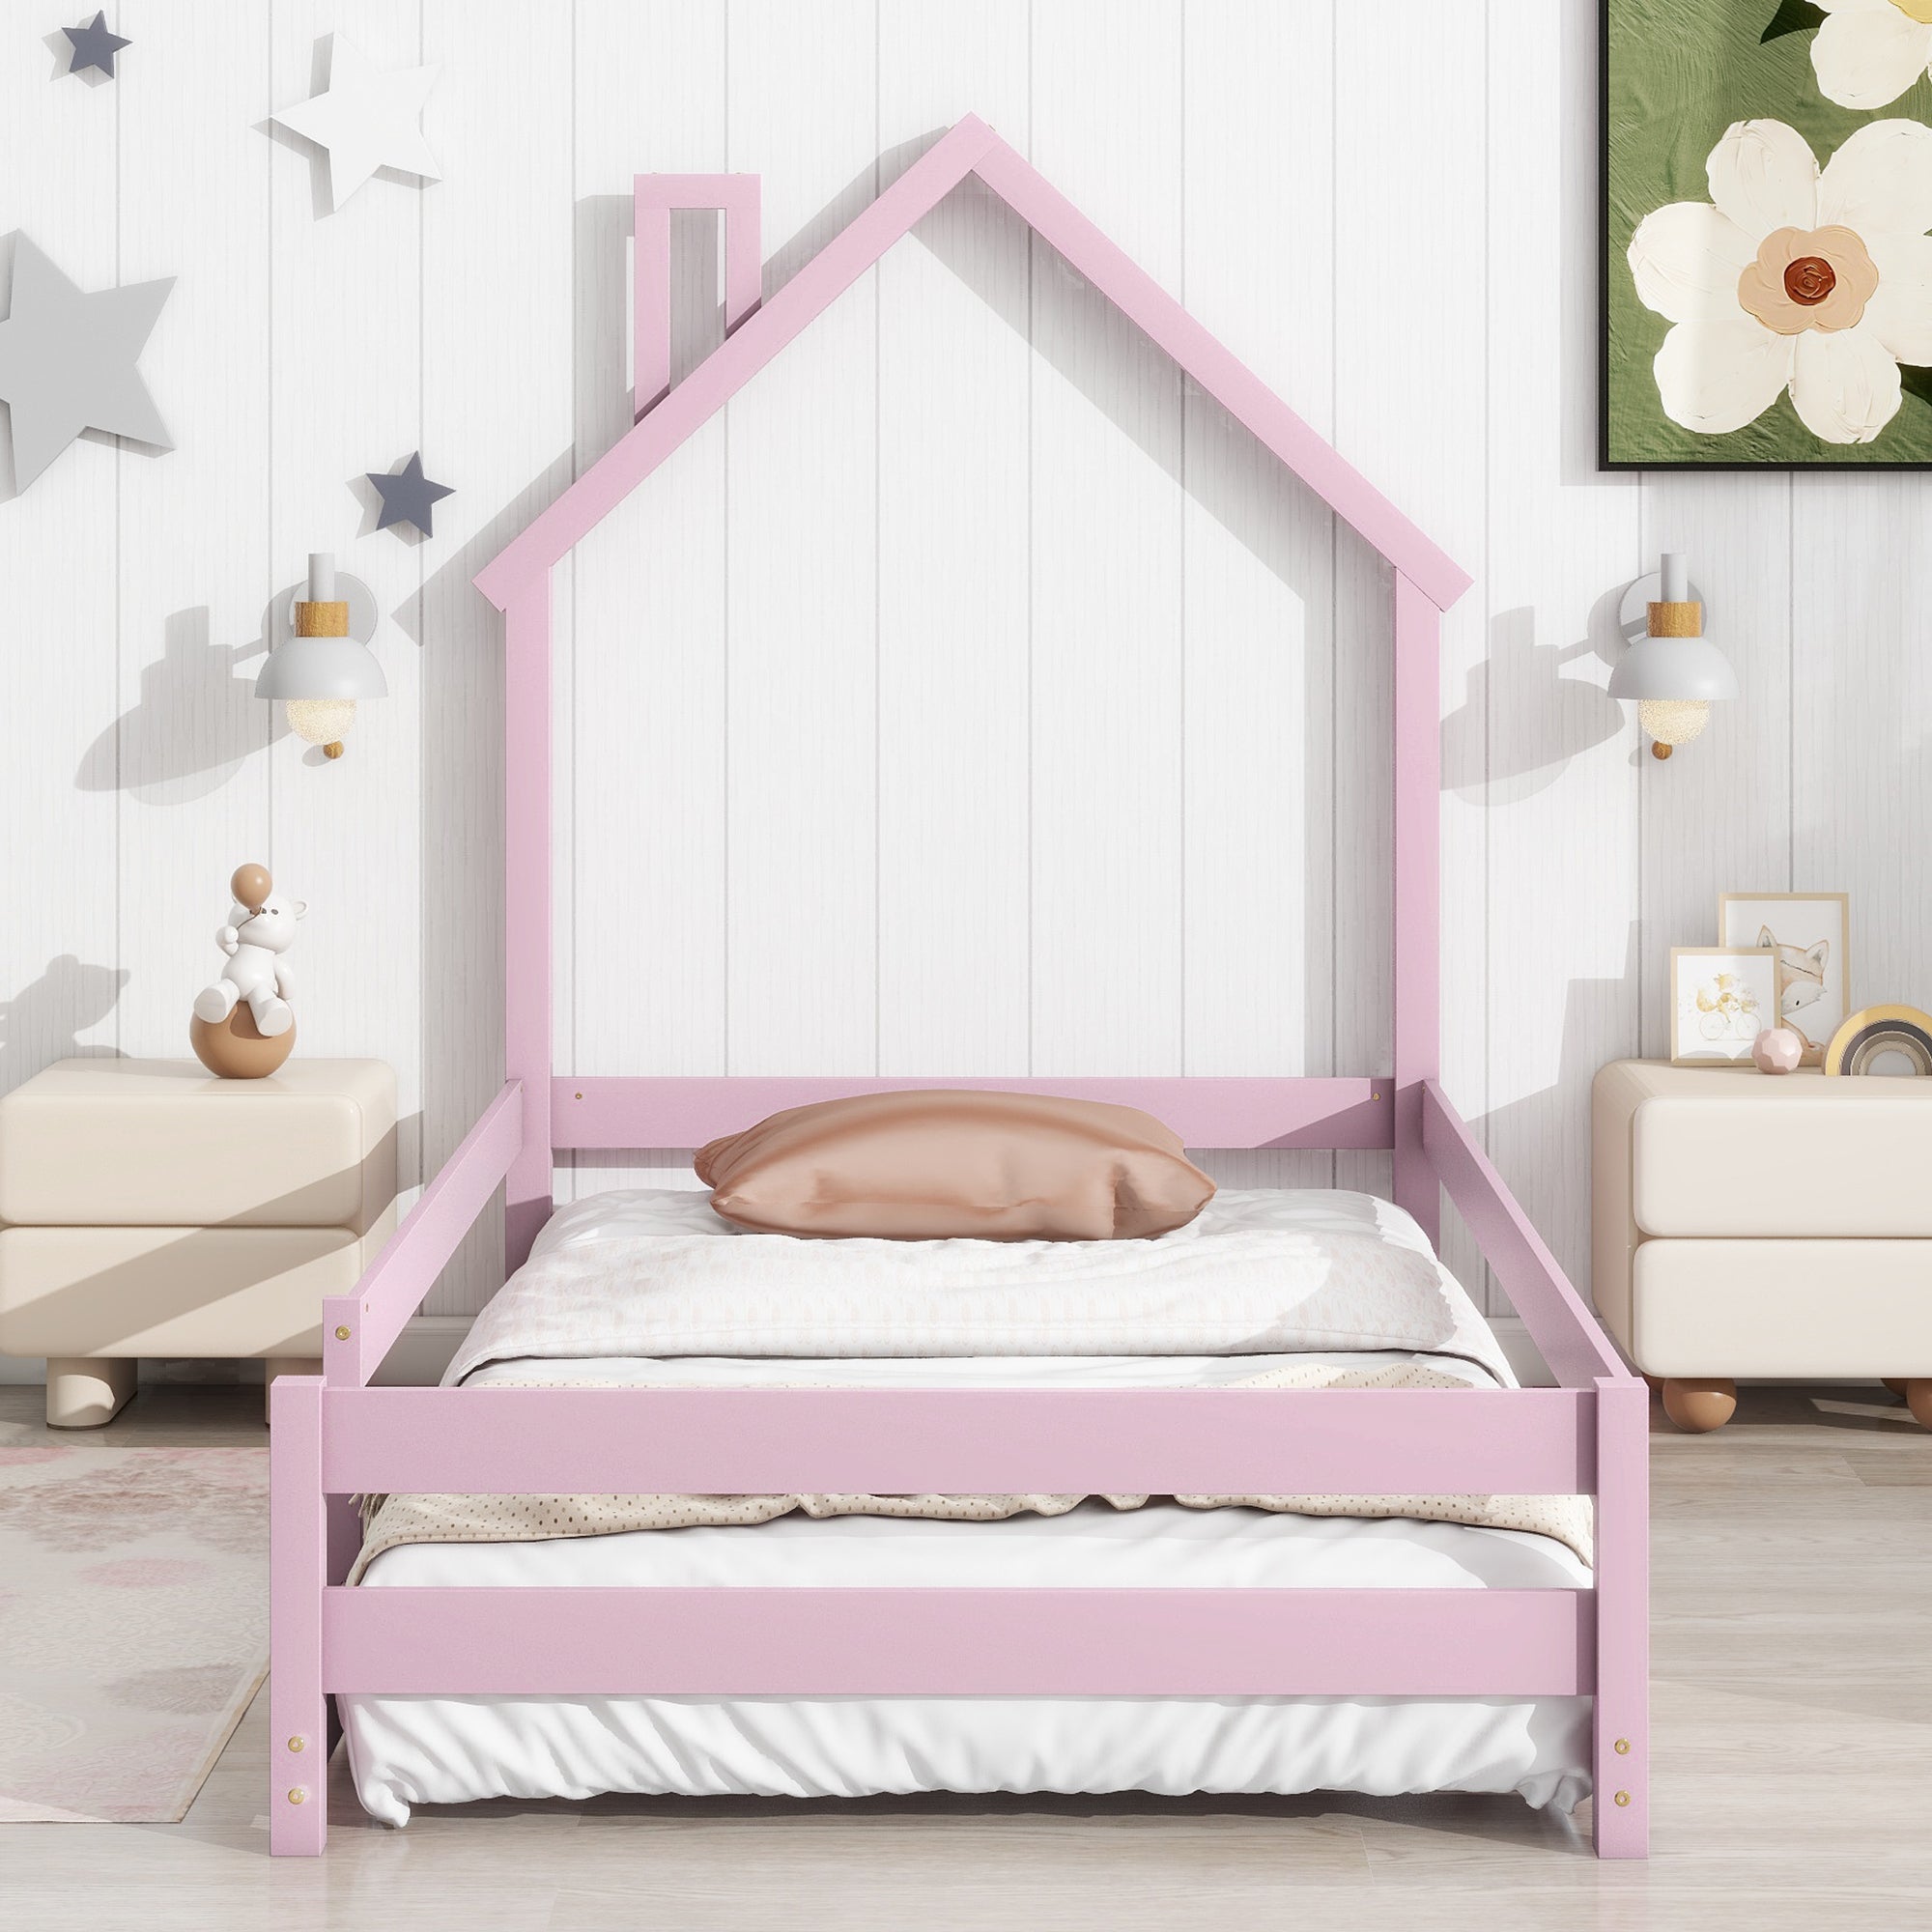 Twin Size Wood bed with House-shaped Headboard Floor bed with Fences,Pink